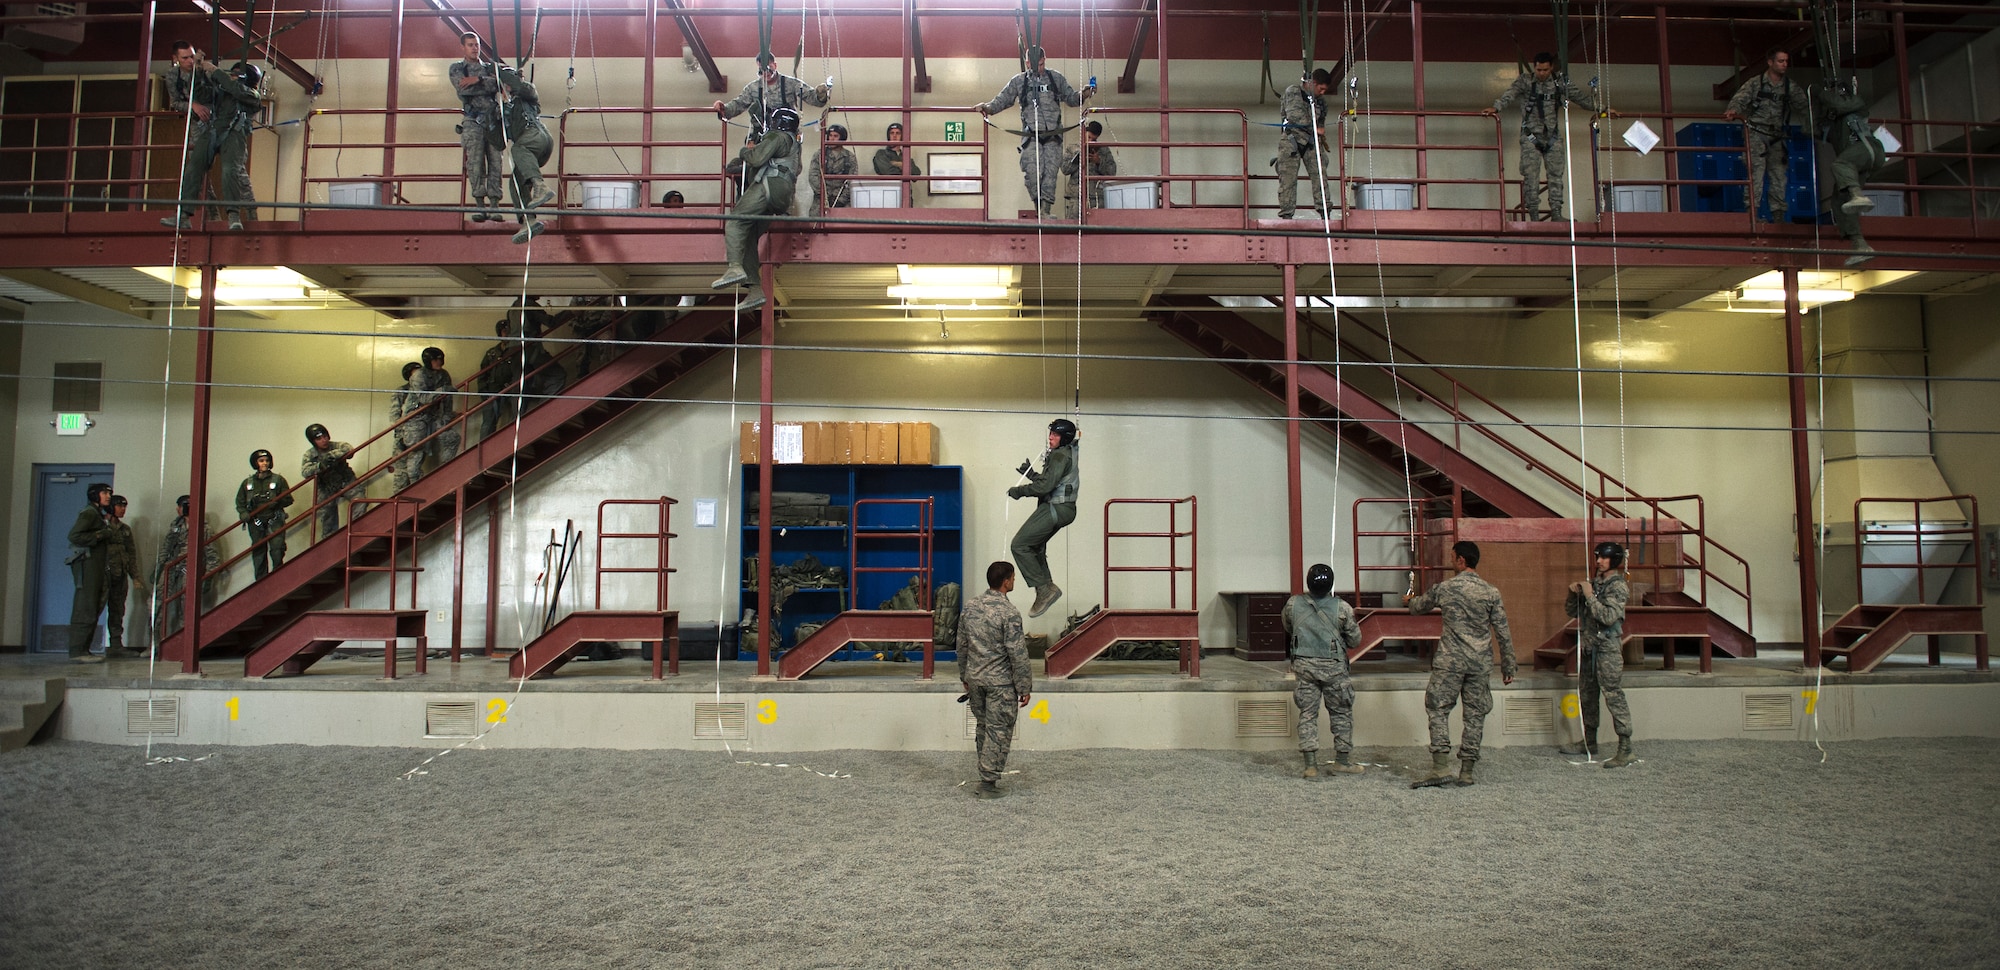 Survival, Evasion, Resistance and Escape specialists help students from across the Air Force learn how to use a personnel lowering device during the hands on portion of the emergency parachute training course May 26, 2016, at Fairchild Air Force Base, Wash. The training starts in a classroom where SERE specialists go over how parachutes function, how to inspect equipment, how to put a parachute on, how to do corrective function procedures and other important hands on information. (U.S. Air Force photo/Airmen 1st Class Sean Campbell)
